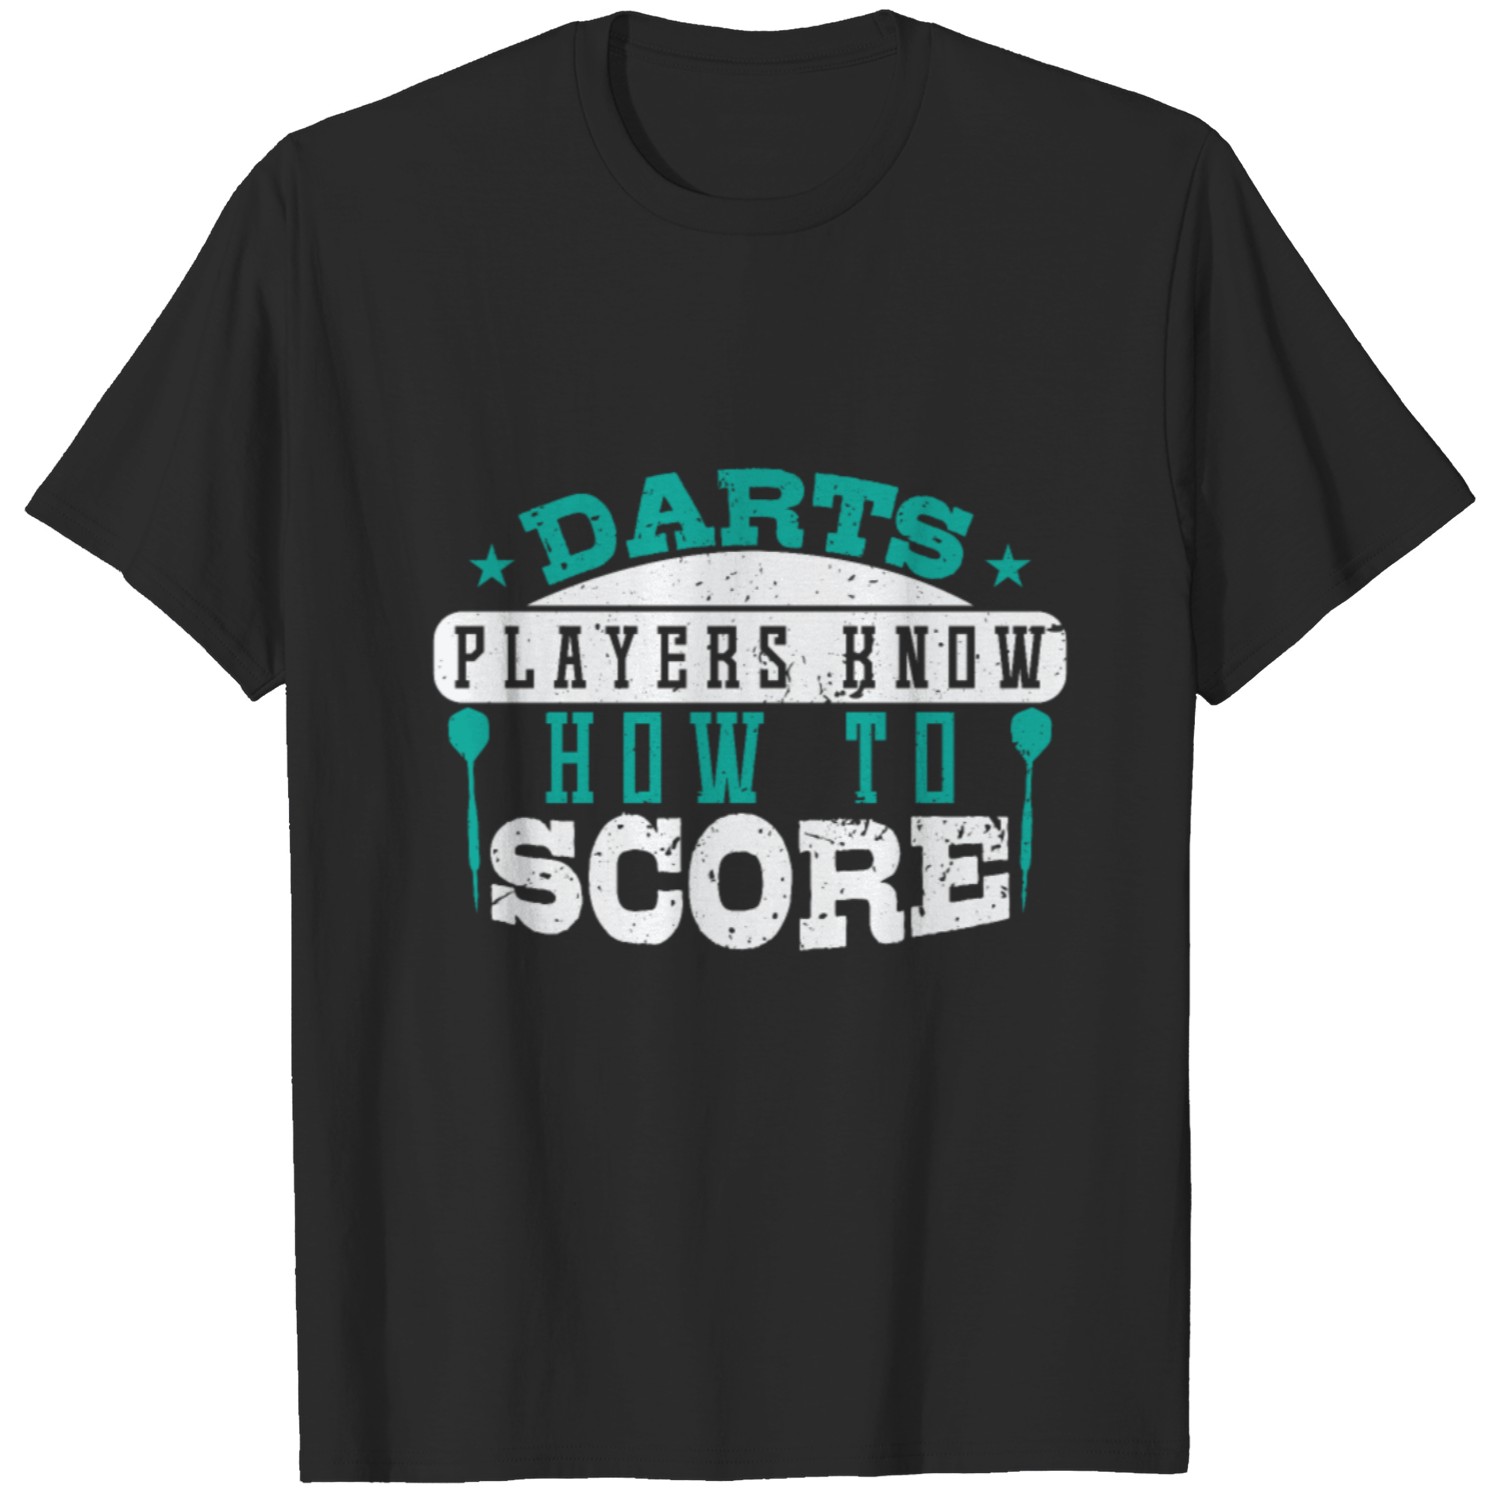 Darts players know how to score T-shirt